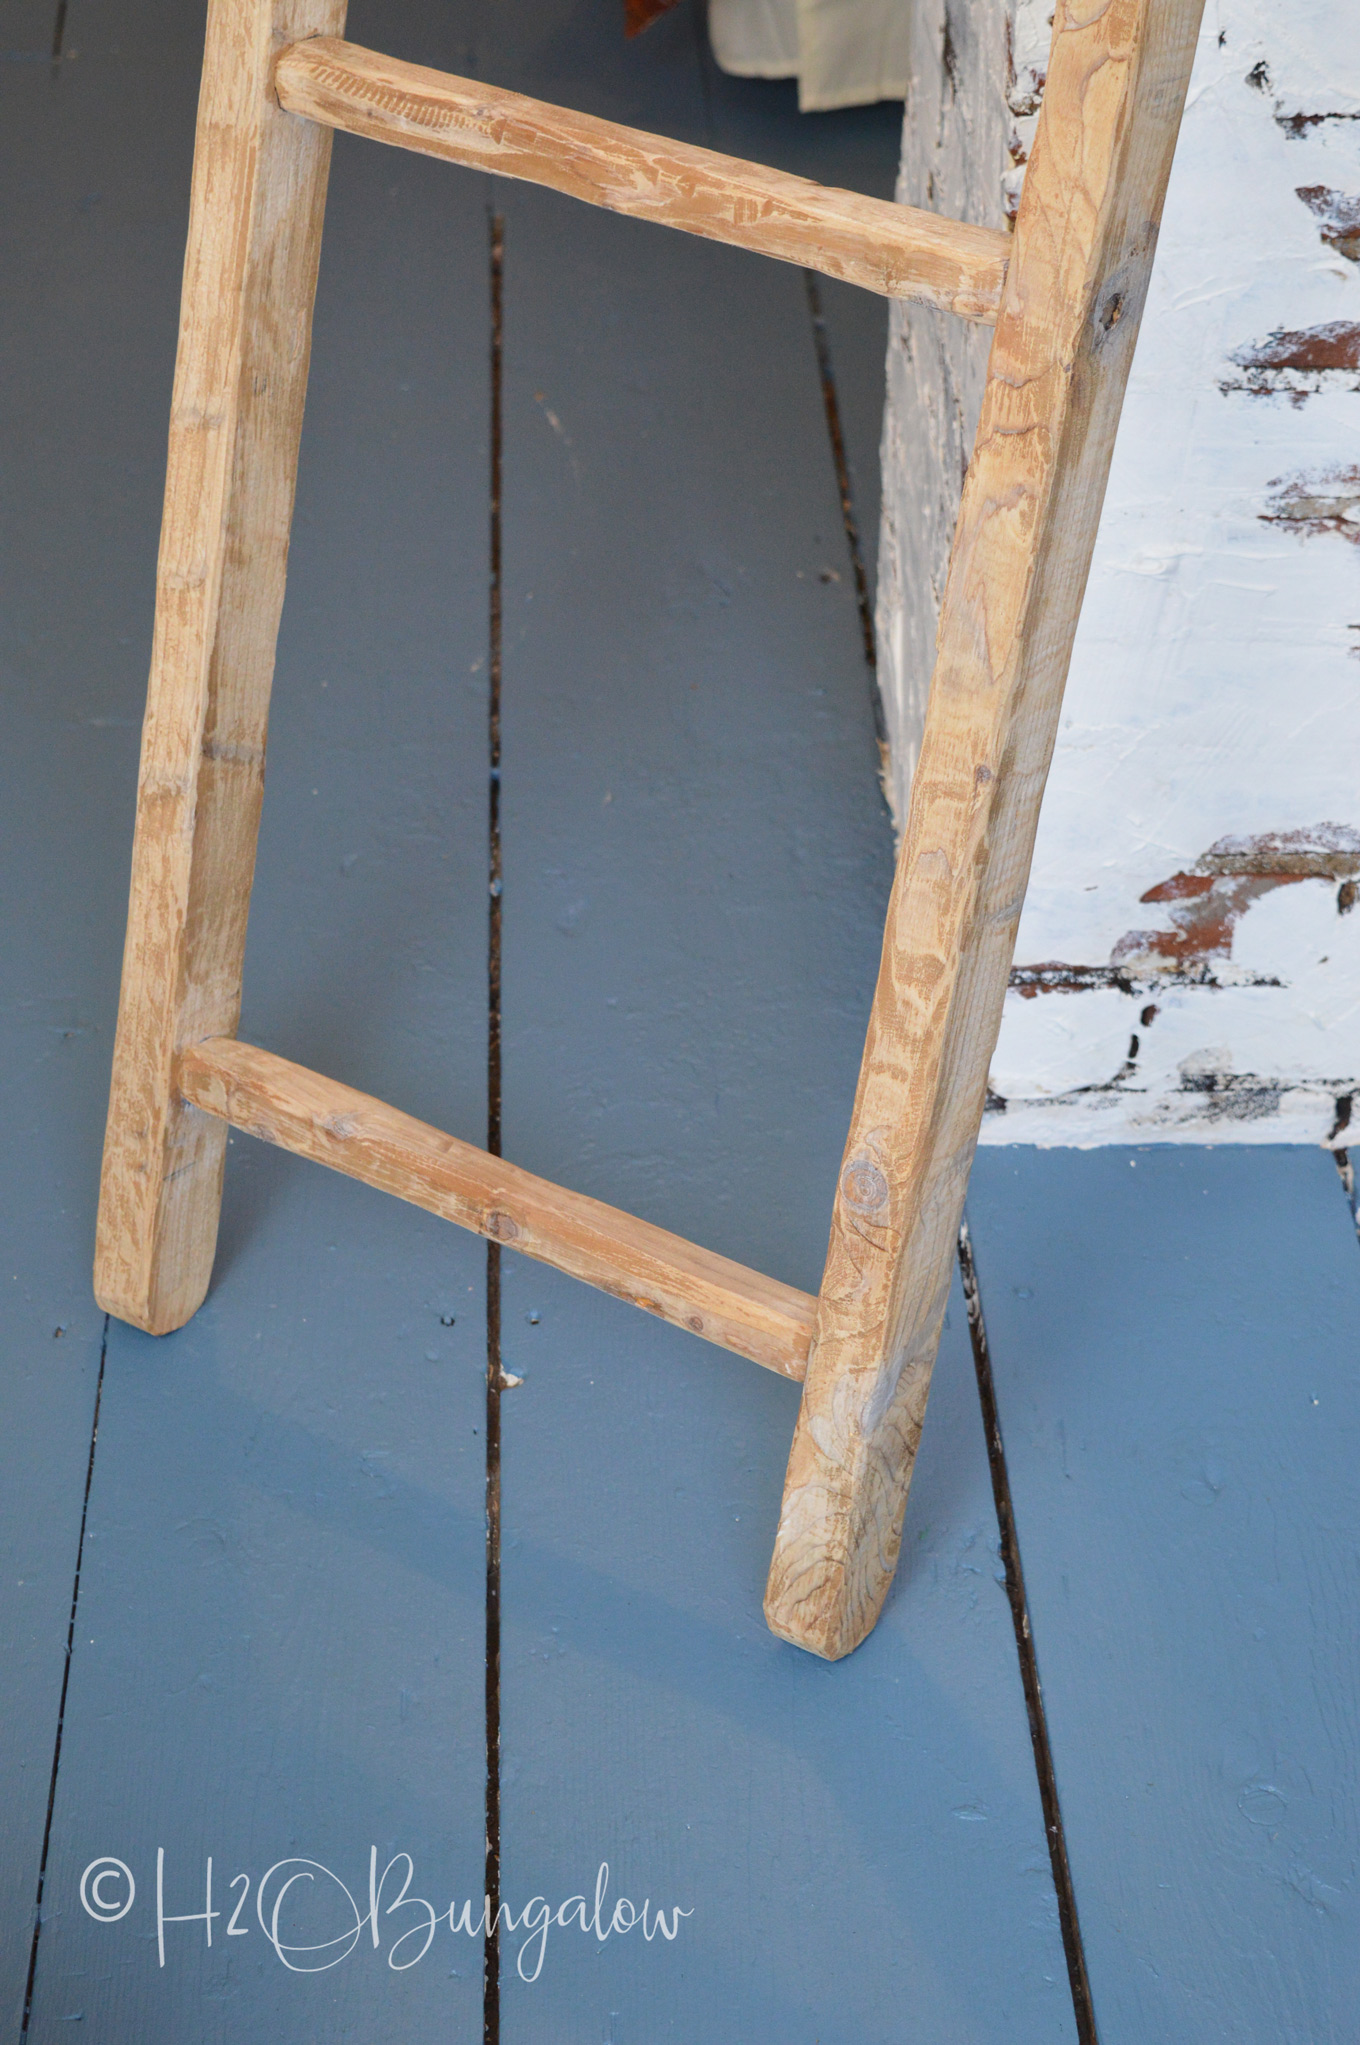 old ladder shown on gray painted floor